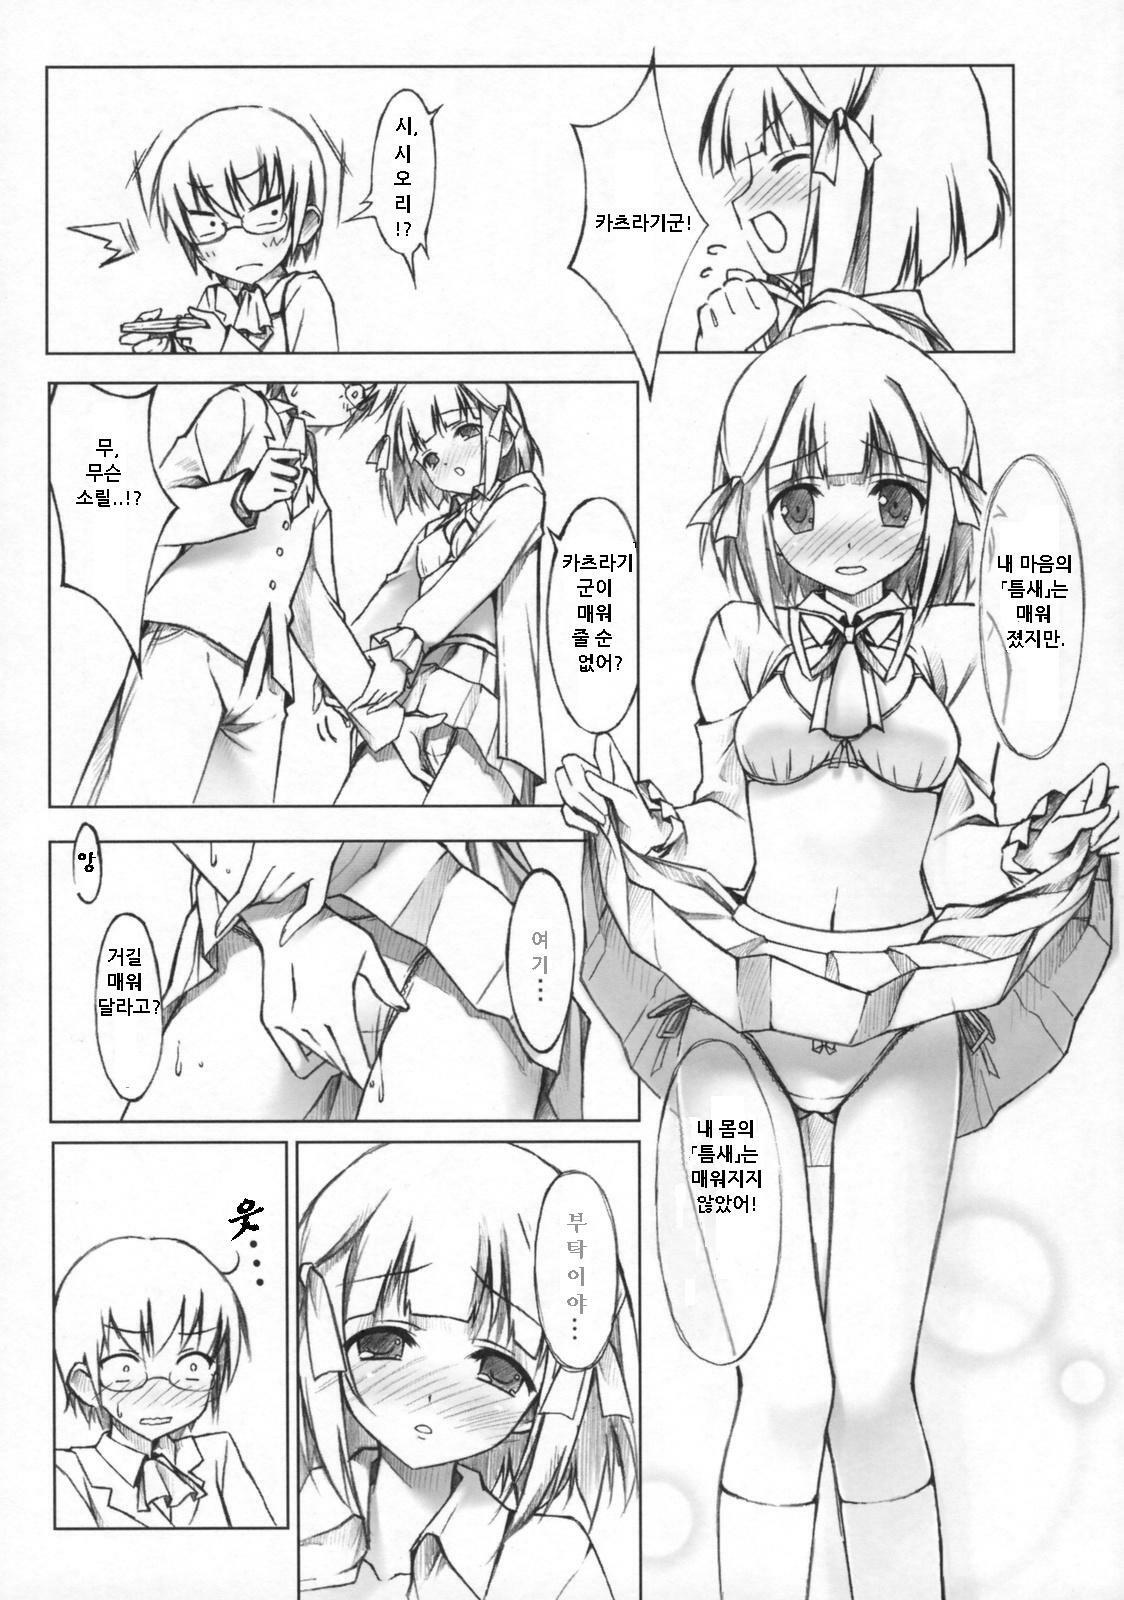 (COMIC1☆3) [Afterschool of the 5th year (Kantoku)] Tachiyomi Senyou Vol. 28 | 서서읽기전용 (The World God Only Knows) [Korean] page 6 full